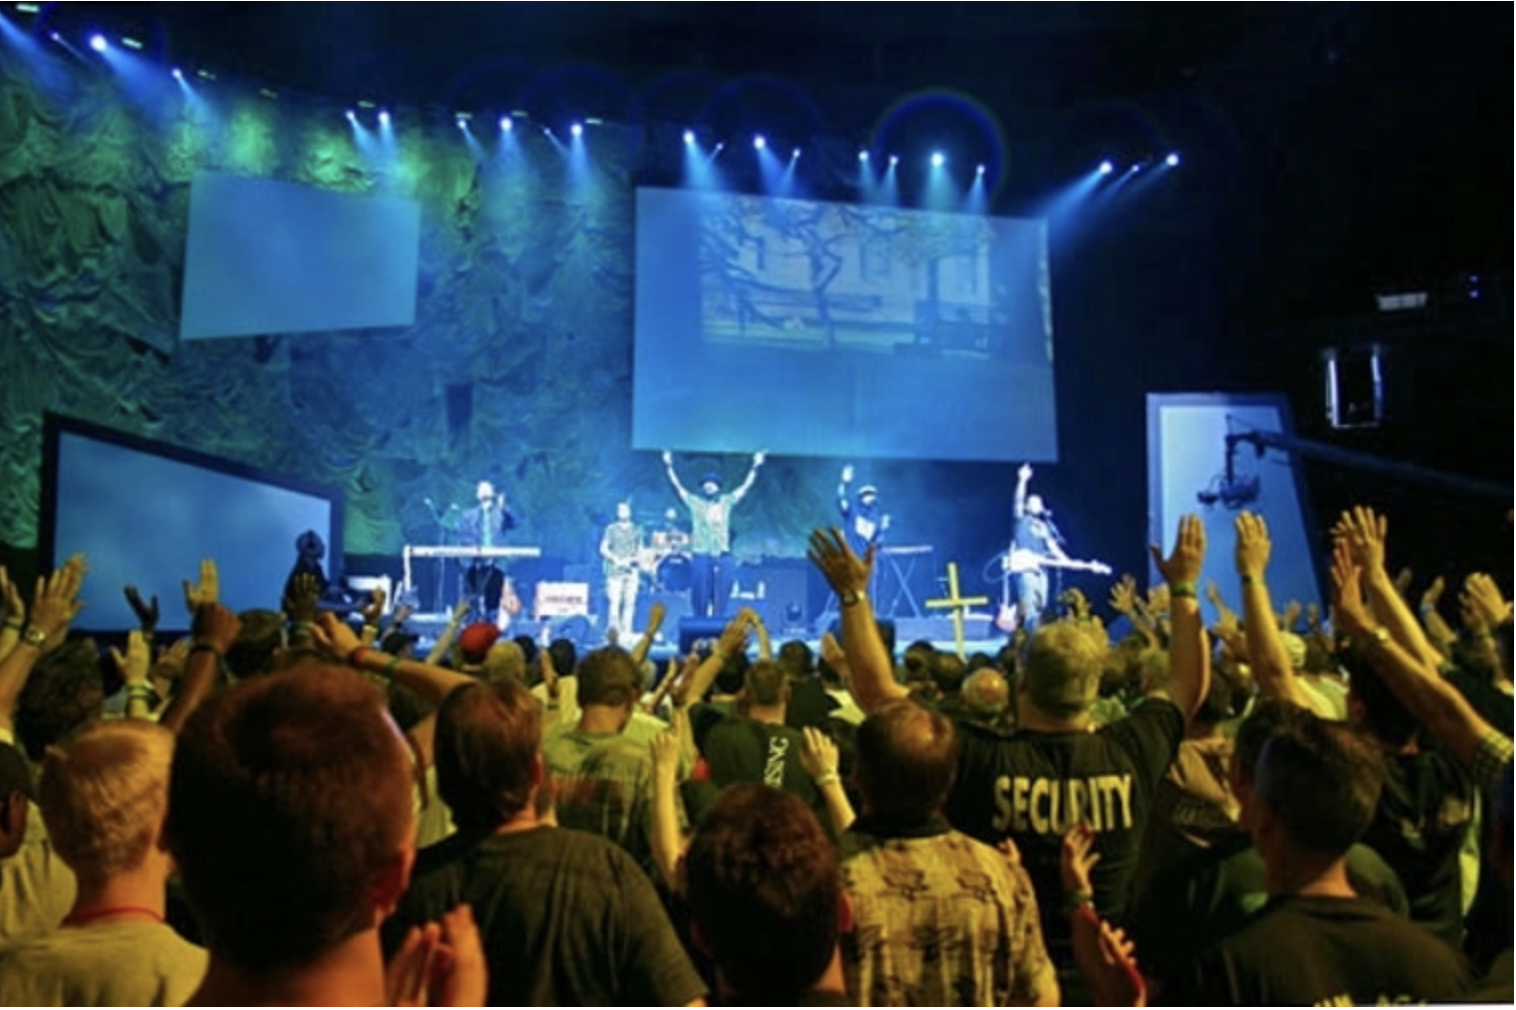 Christian venues and Churches cancel Promise Keepers outreach over their Biblical stance on gender